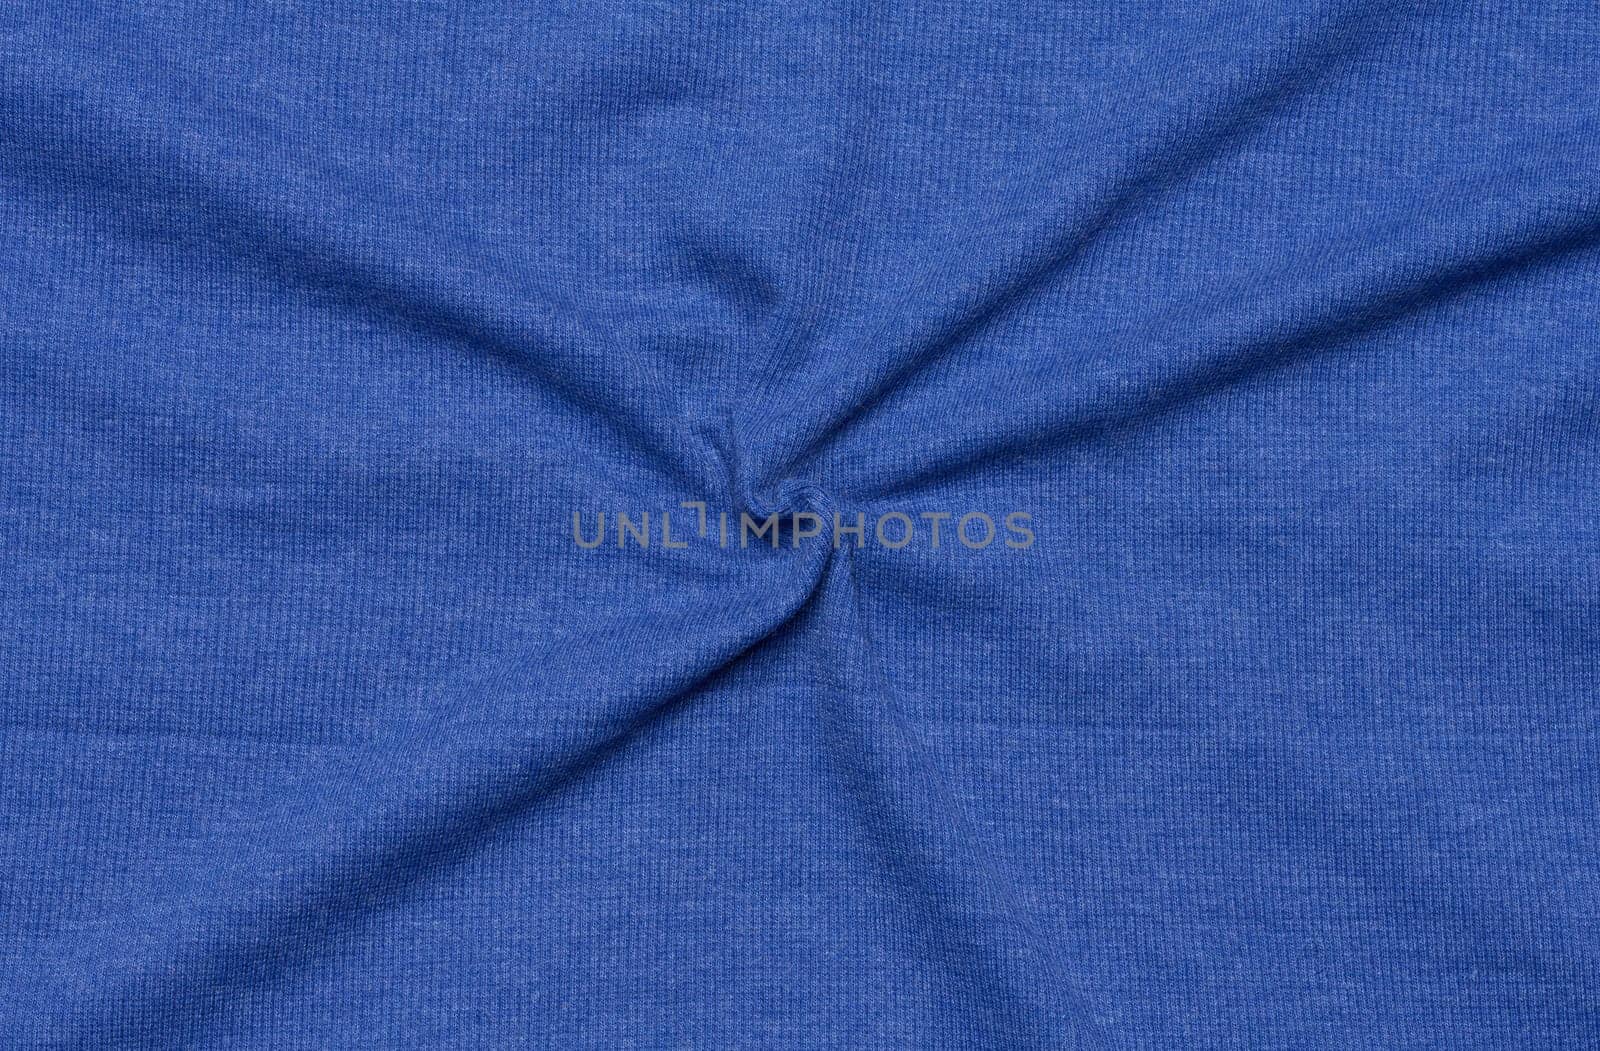 Blue knitted fabric for tailoring, full frame